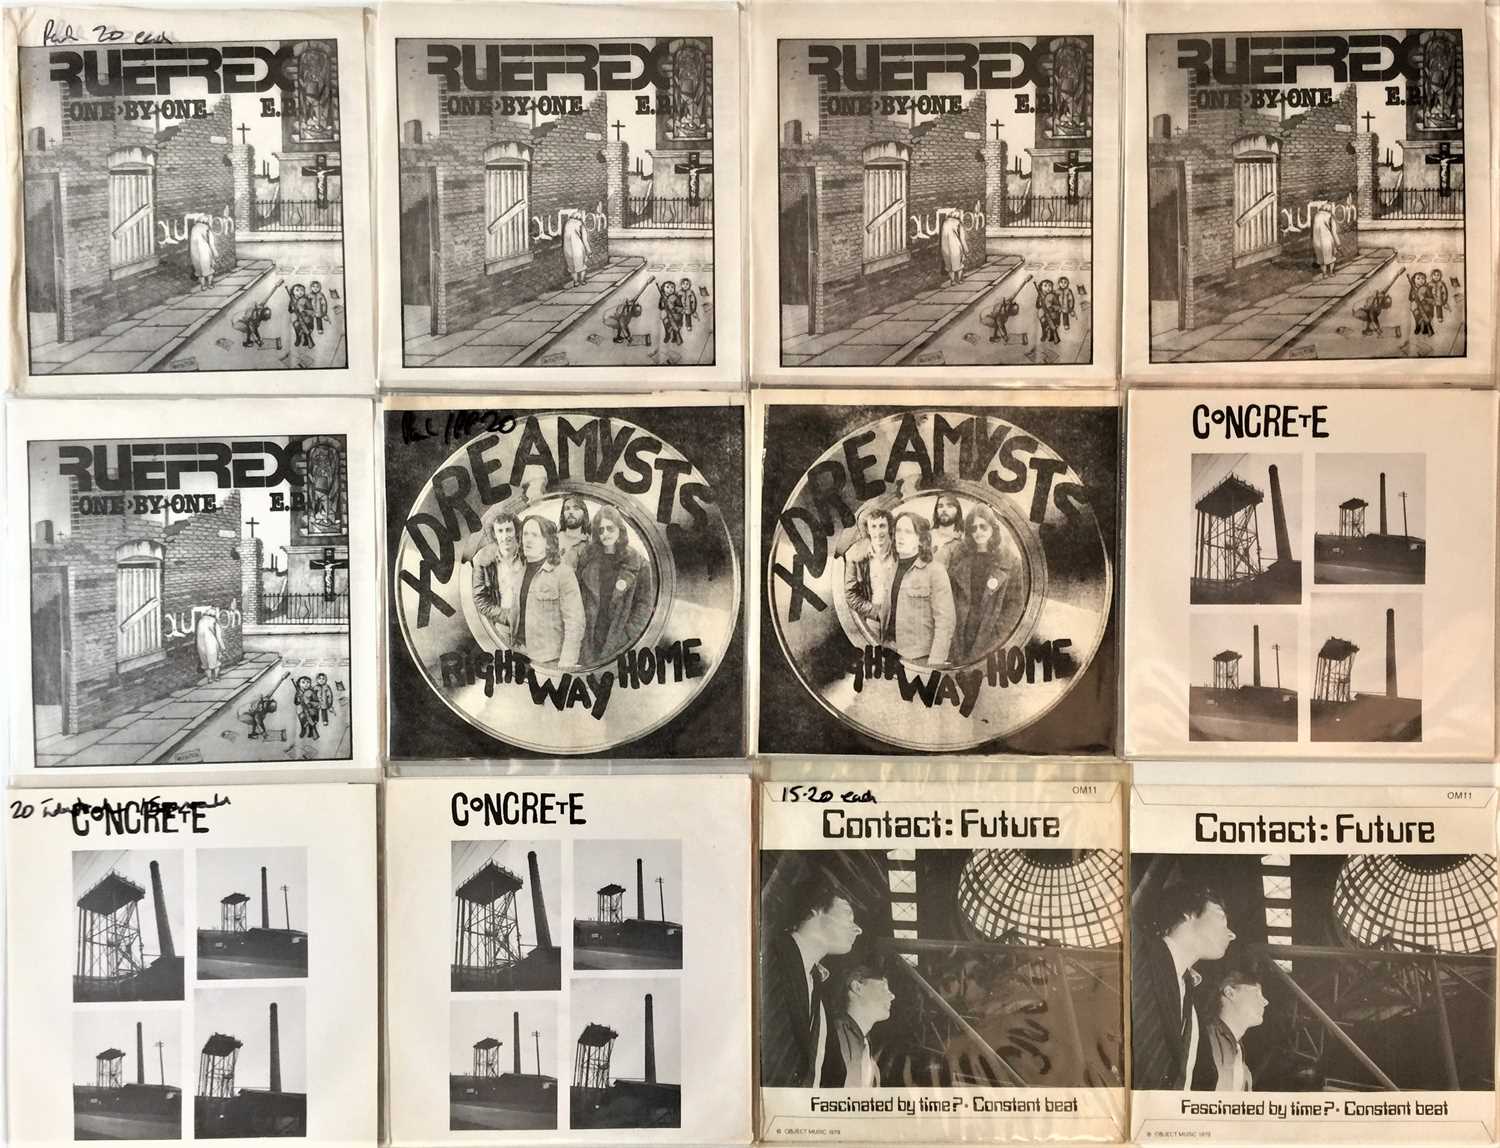 Lot 22 - PUNK/NEW WAVE - 7" COLLECTION (EX-DISTRIBUTOR STOCK)